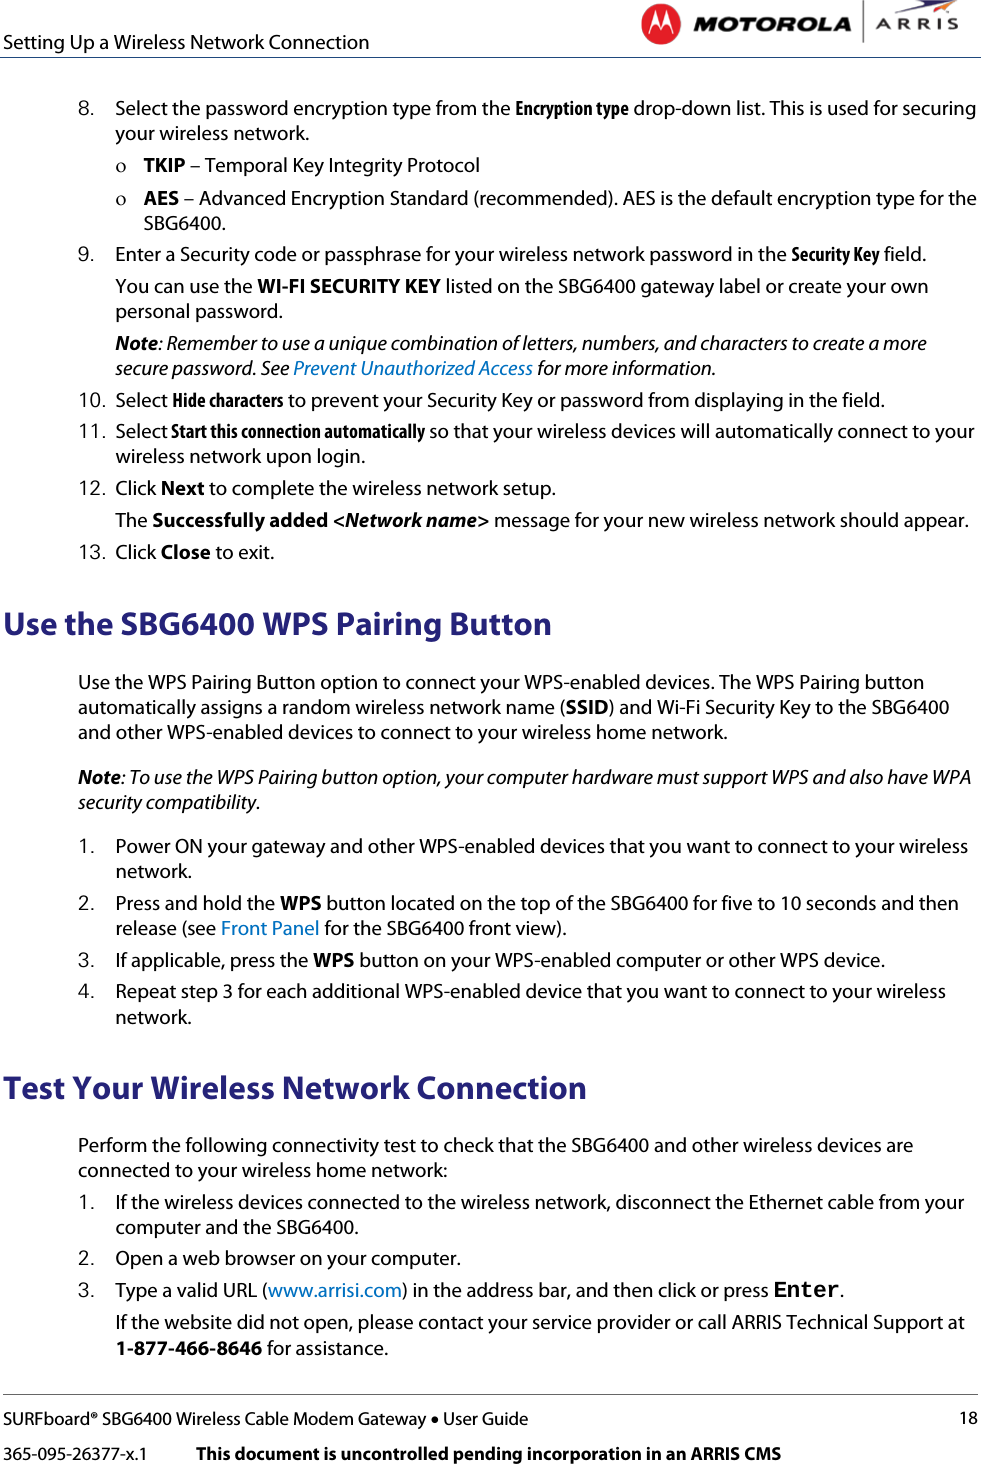 Setting Up a Wireless Network Connection   SURFboard® SBG6400 Wireless Cable Modem Gateway • User Guide 18 365-095-26377-x.1            This document is uncontrolled pending incorporation in an ARRIS CMS  8. Select the password encryption type from the Encryption type drop-down list. This is used for securing your wireless network. ο TKIP – Temporal Key Integrity Protocol ο AES – Advanced Encryption Standard (recommended). AES is the default encryption type for the SBG6400. 9. Enter a Security code or passphrase for your wireless network password in the Security Key field. You can use the WI-FI SECURITY KEY listed on the SBG6400 gateway label or create your own personal password. Note: Remember to use a unique combination of letters, numbers, and characters to create a more secure password. See Prevent Unauthorized Access for more information. 10. Select Hide characters to prevent your Security Key or password from displaying in the field. 11. Select Start this connection automatically so that your wireless devices will automatically connect to your wireless network upon login. 12. Click Next to complete the wireless network setup. The Successfully added &lt;Network name&gt; message for your new wireless network should appear. 13. Click Close to exit. Use the SBG6400 WPS Pairing Button Use the WPS Pairing Button option to connect your WPS-enabled devices. The WPS Pairing button automatically assigns a random wireless network name (SSID) and Wi-Fi Security Key to the SBG6400 and other WPS-enabled devices to connect to your wireless home network. Note: To use the WPS Pairing button option, your computer hardware must support WPS and also have WPA security compatibility. 1. Power ON your gateway and other WPS-enabled devices that you want to connect to your wireless network. 2. Press and hold the WPS button located on the top of the SBG6400 for five to 10 seconds and then release (see Front Panel for the SBG6400 front view). 3. If applicable, press the WPS button on your WPS-enabled computer or other WPS device. 4. Repeat step 3 for each additional WPS-enabled device that you want to connect to your wireless network. Test Your Wireless Network Connection Perform the following connectivity test to check that the SBG6400 and other wireless devices are connected to your wireless home network: 1. If the wireless devices connected to the wireless network, disconnect the Ethernet cable from your computer and the SBG6400. 2. Open a web browser on your computer.  3. Type a valid URL (www.arrisi.com) in the address bar, and then click or press Enter. If the website did not open, please contact your service provider or call ARRIS Technical Support at 1-877-466-8646 for assistance. 